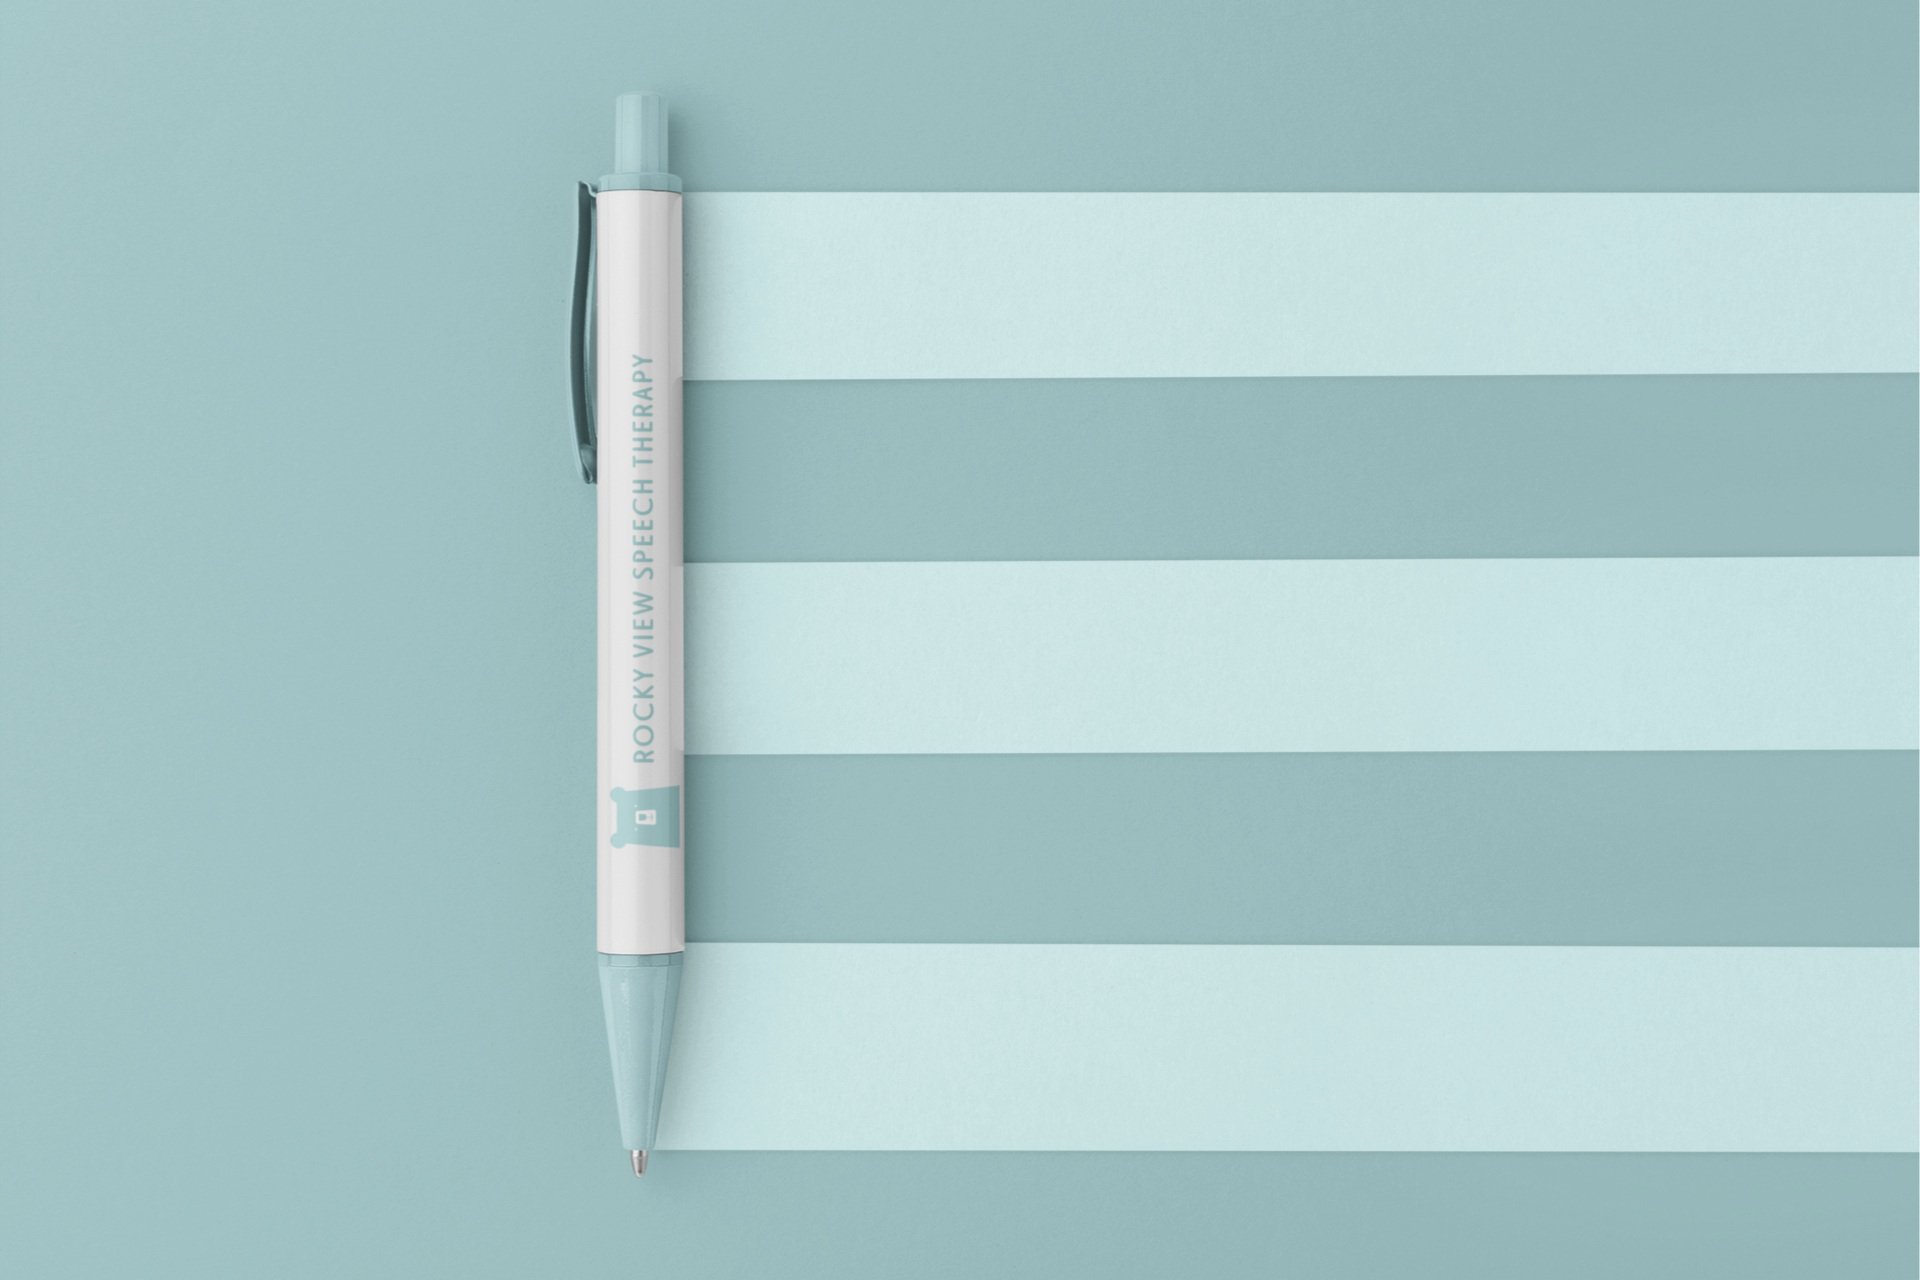 mockup-of-a-pen-on-a-surface-with-three-stripes-23536.jpg